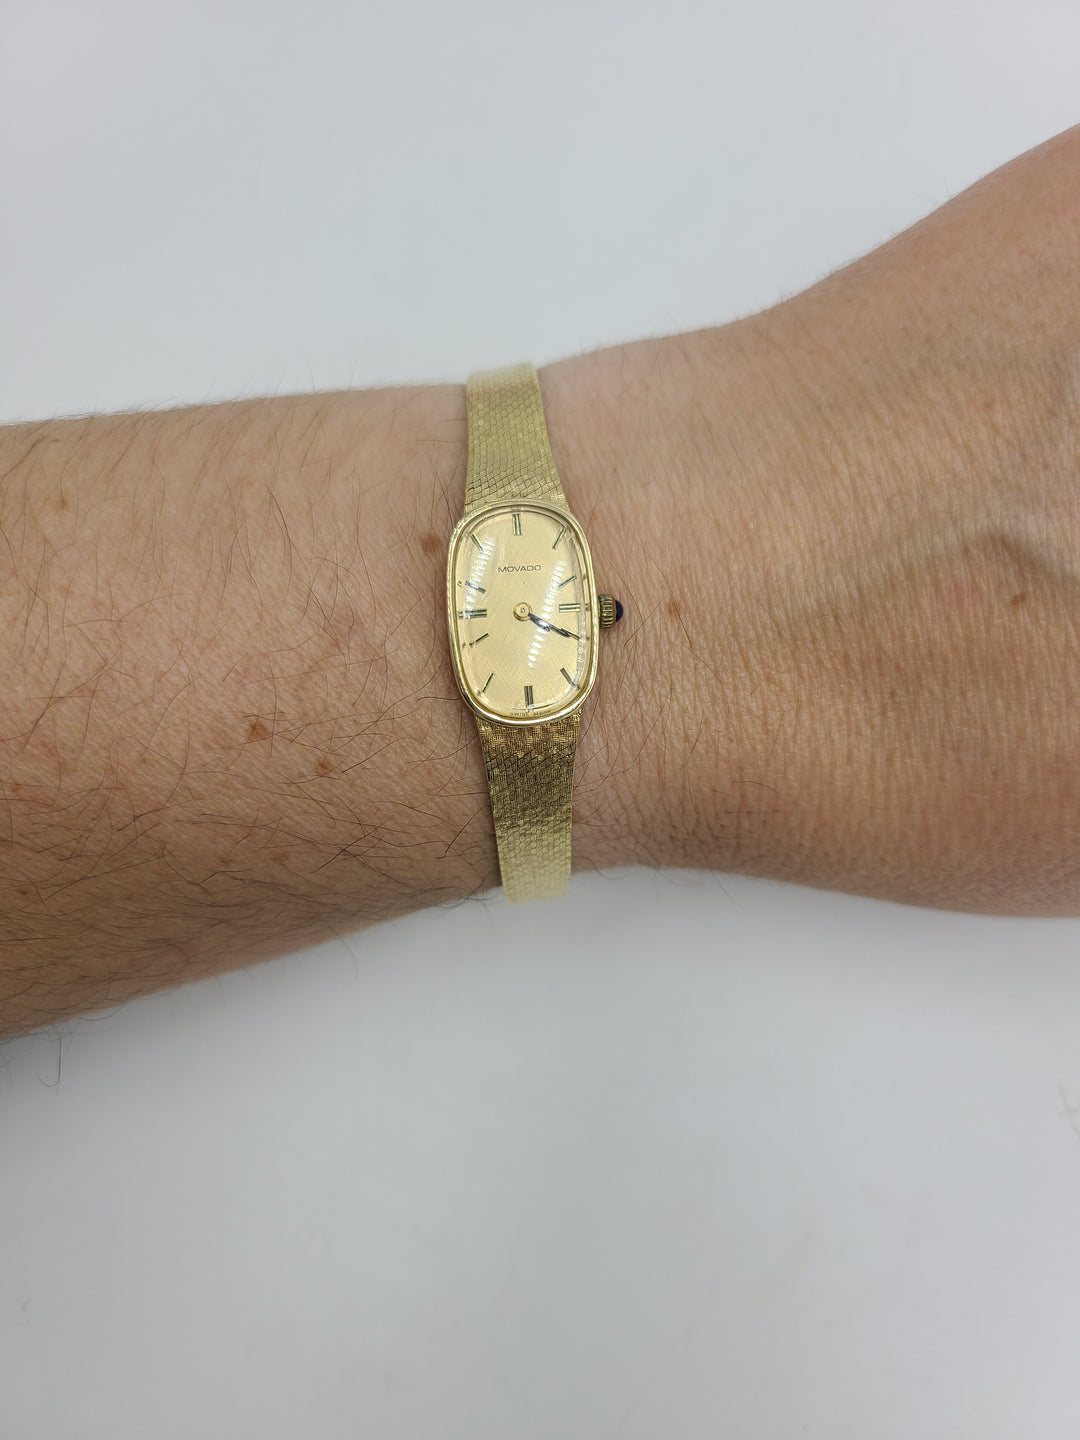 k740 Lovely Vintage Solid 14kt Yellow Gold Mechanical Movado Wristwatch